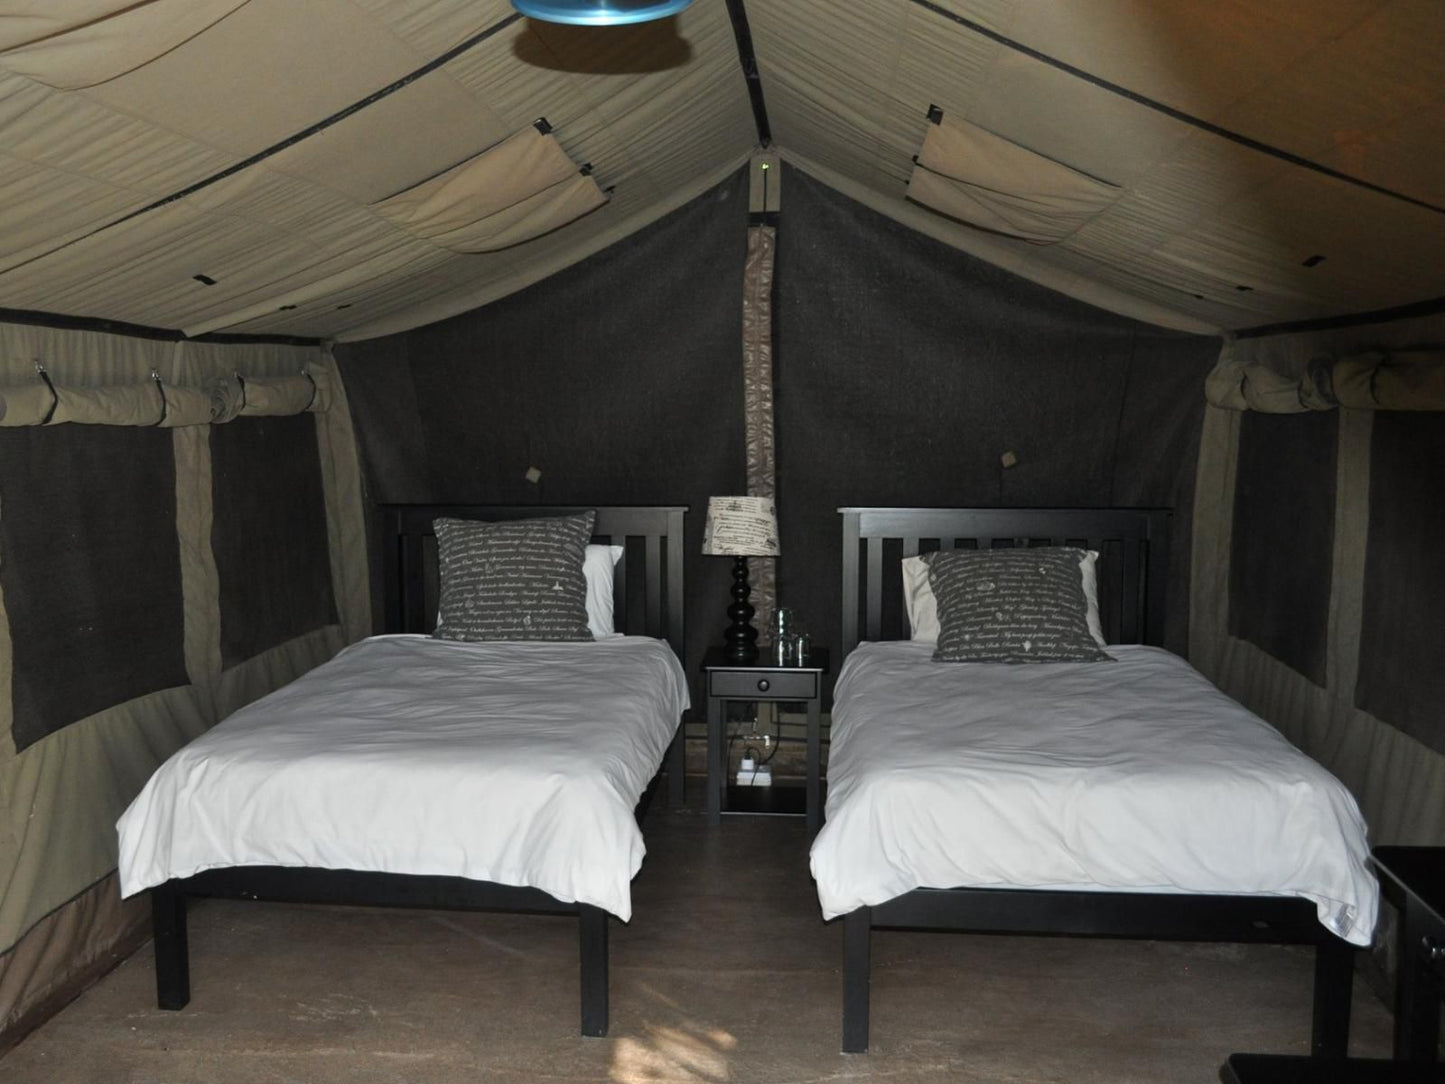 Mount Marula Game Lodge Thabazimbi Limpopo Province South Africa Unsaturated, Tent, Architecture, Bedroom